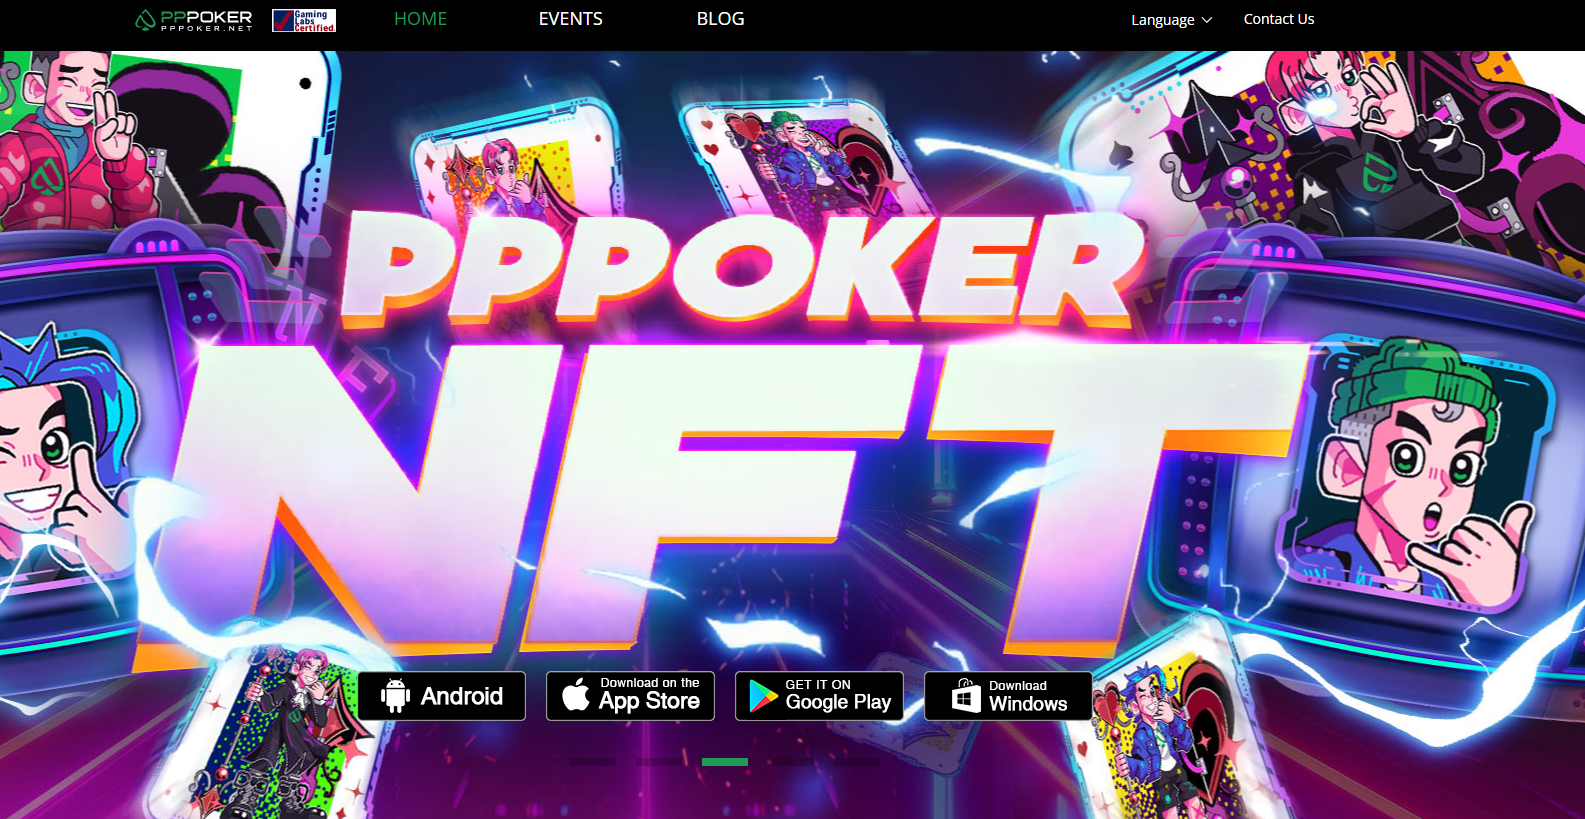 PPPOKER(ピーピーポーカー）